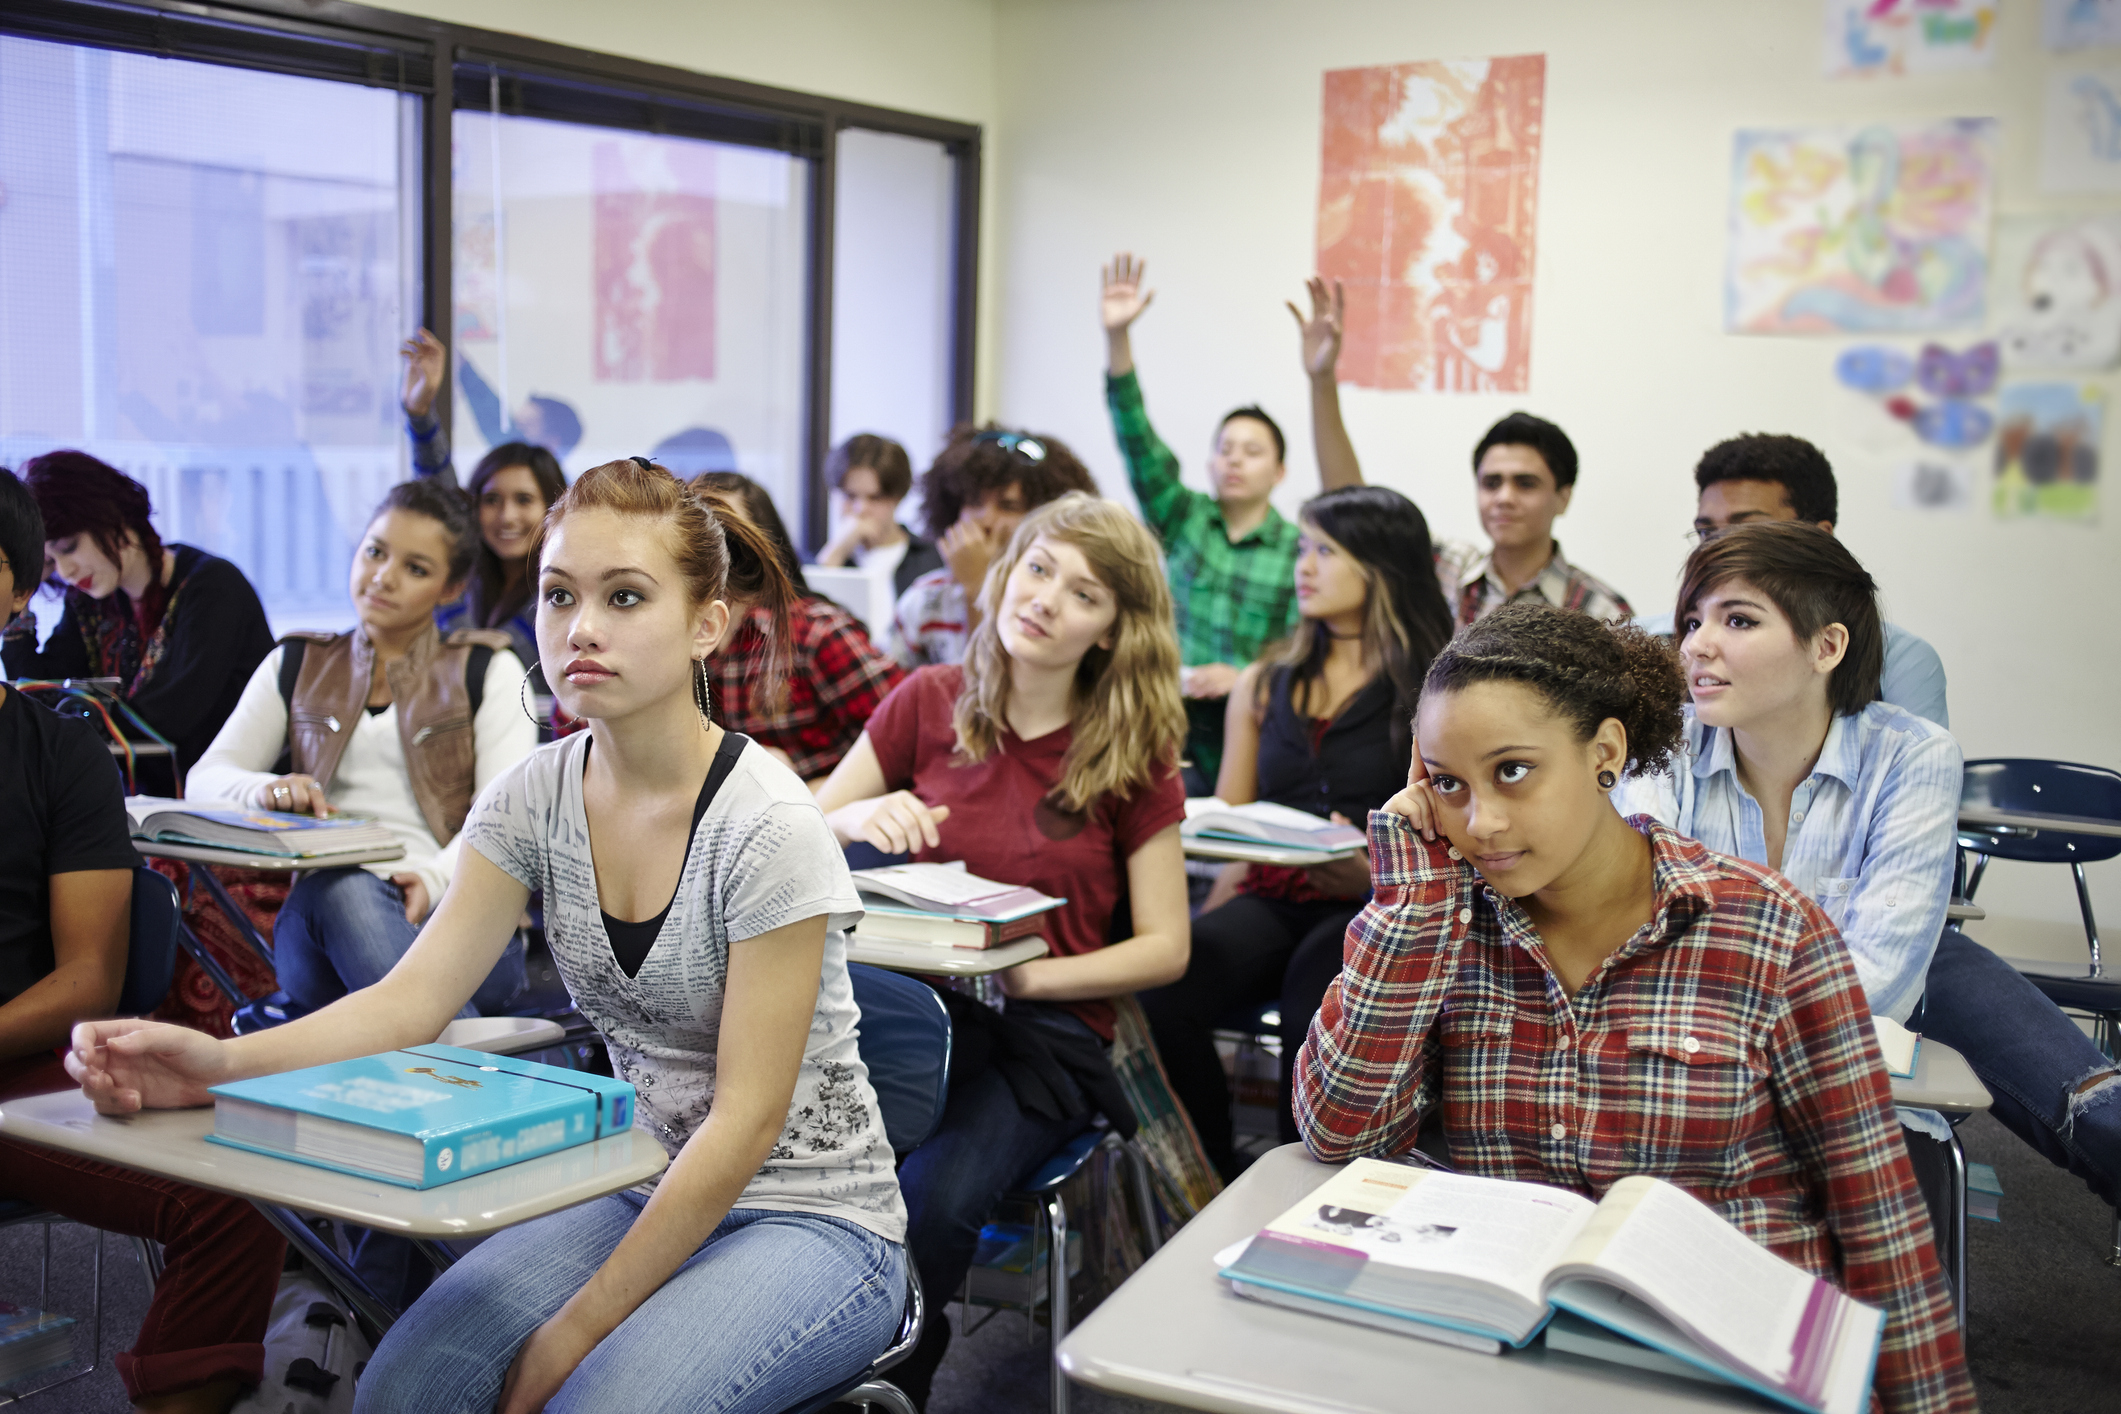 A diverse group of students in a classroom setting